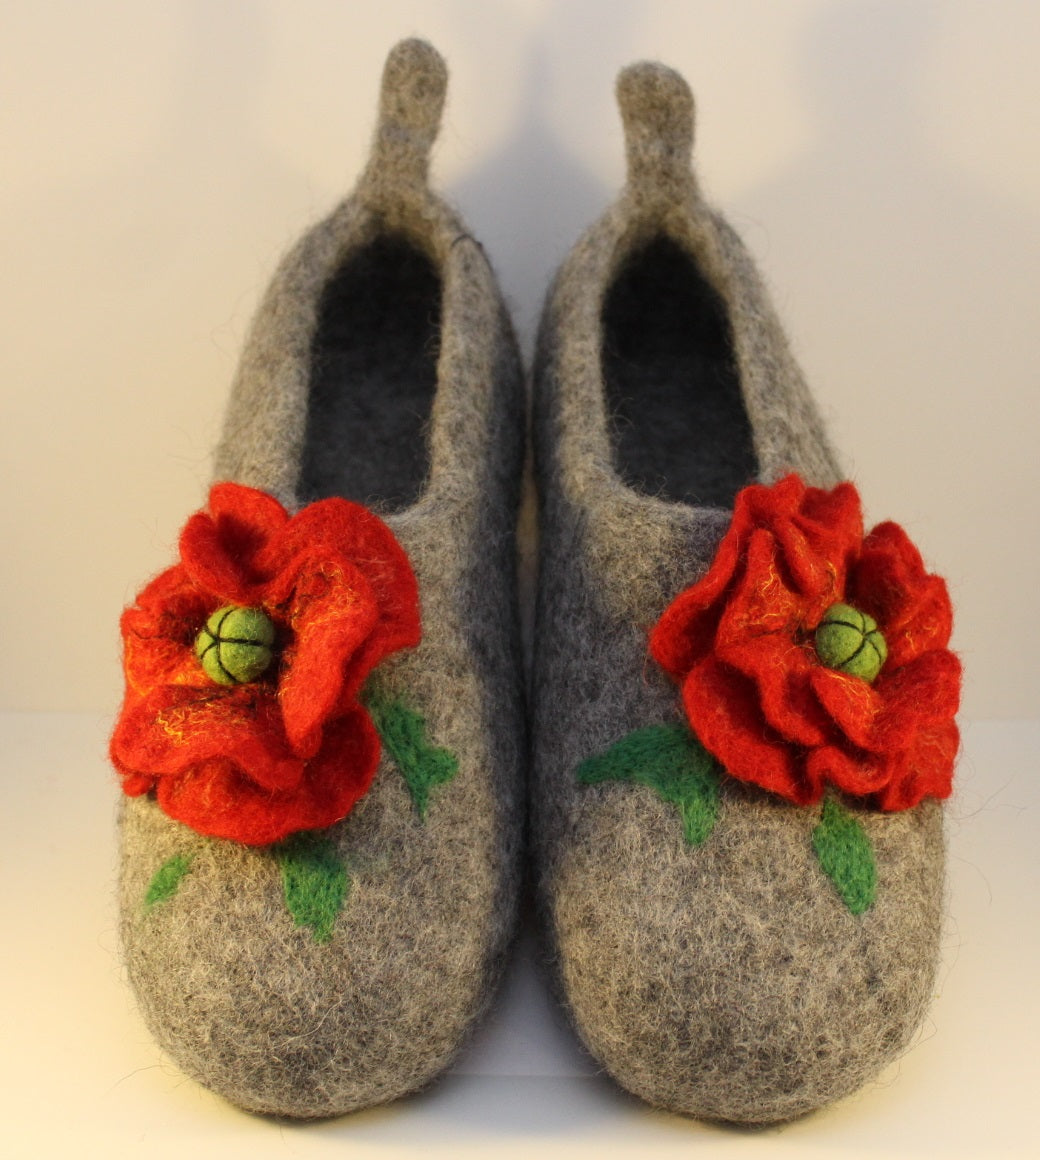 Handfelted Wool Slippers, UK Size 7